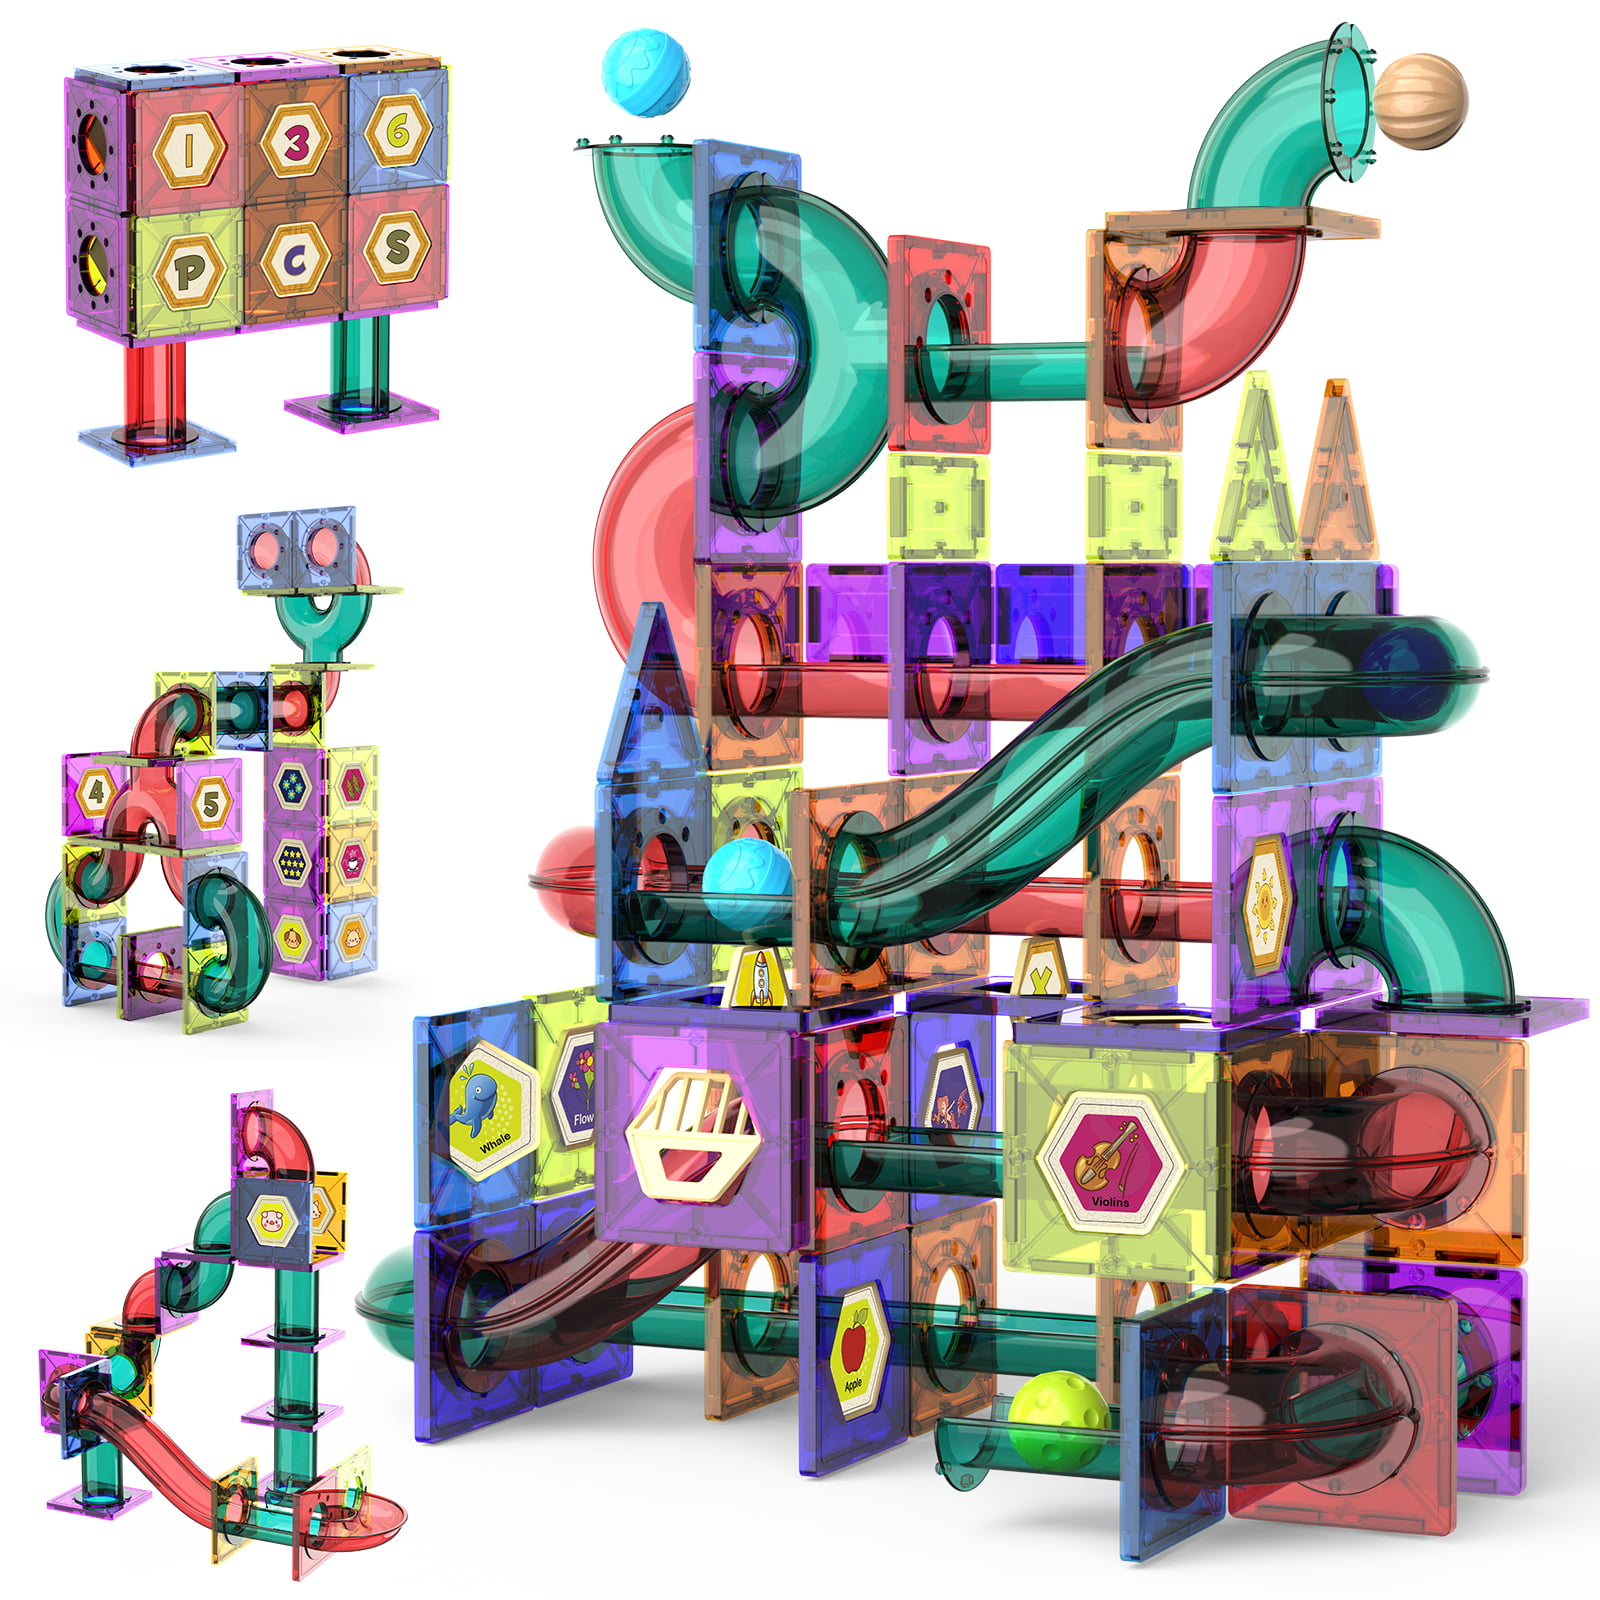 Child Brain Developem Toys GARUNK 135 Pcs Clear Color 3D Magnetic Building Blocks Magnetic Tile Marble Run for Kids Gift for Boys Girls Aged 8+ Years Old Magnetic Ball Run Toys 